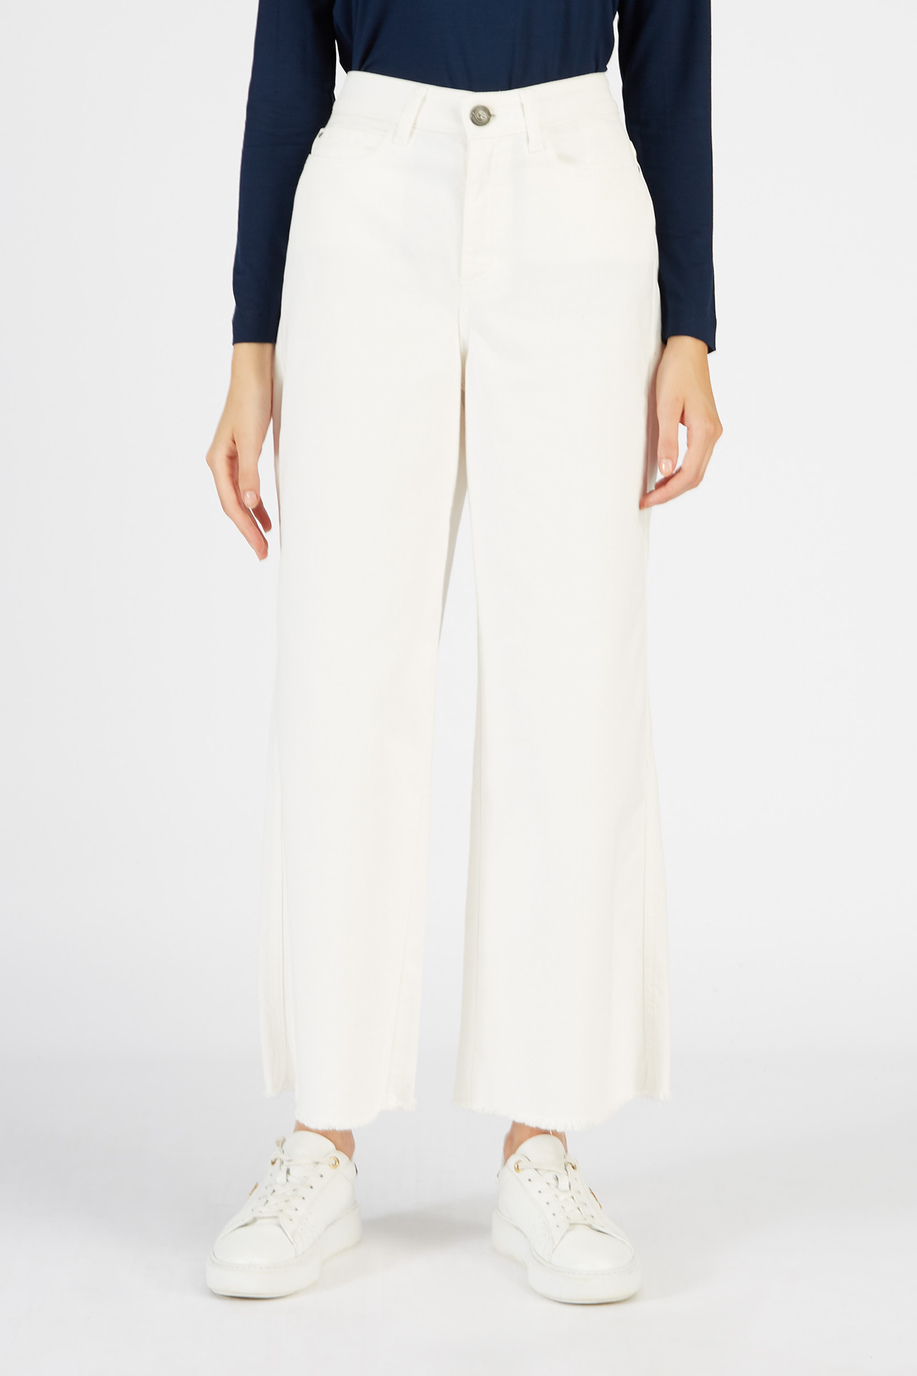 Women’s wide high-waisted trousers in regular fit stretch cotton - Autumn style | La Martina - Official Online Shop